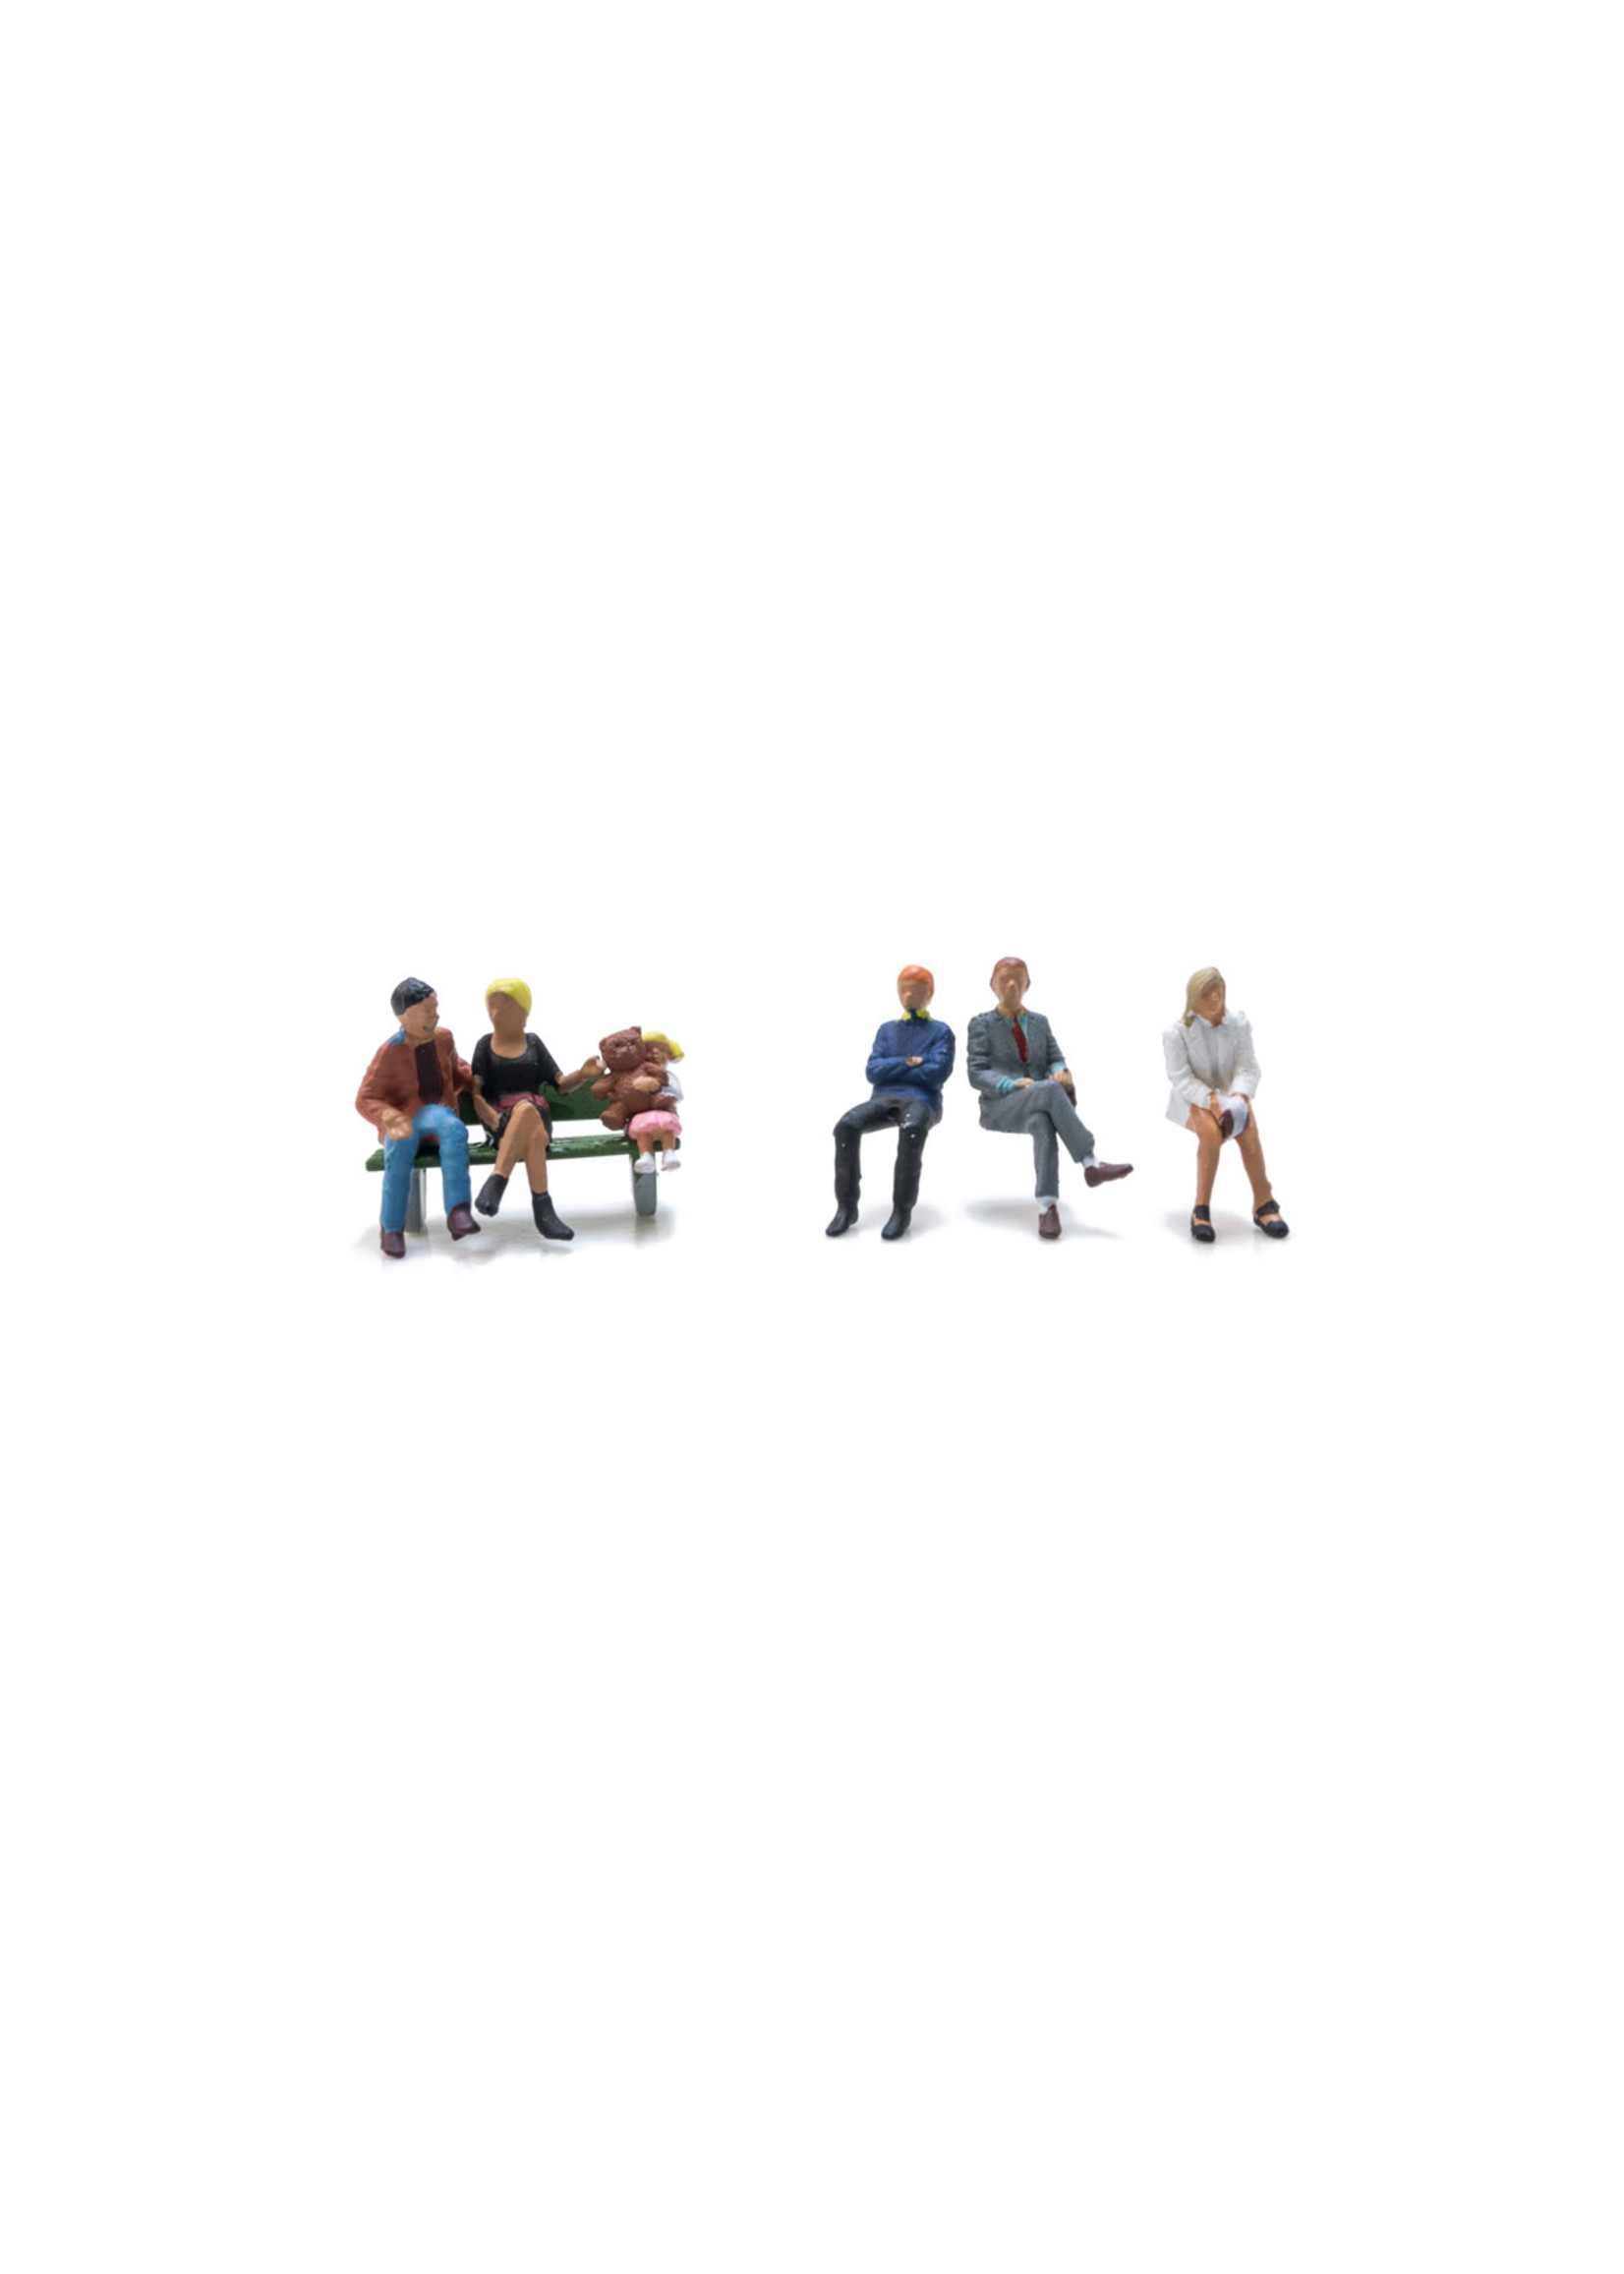 Woodland Scenics A2134 - N Scale Bus Stop People